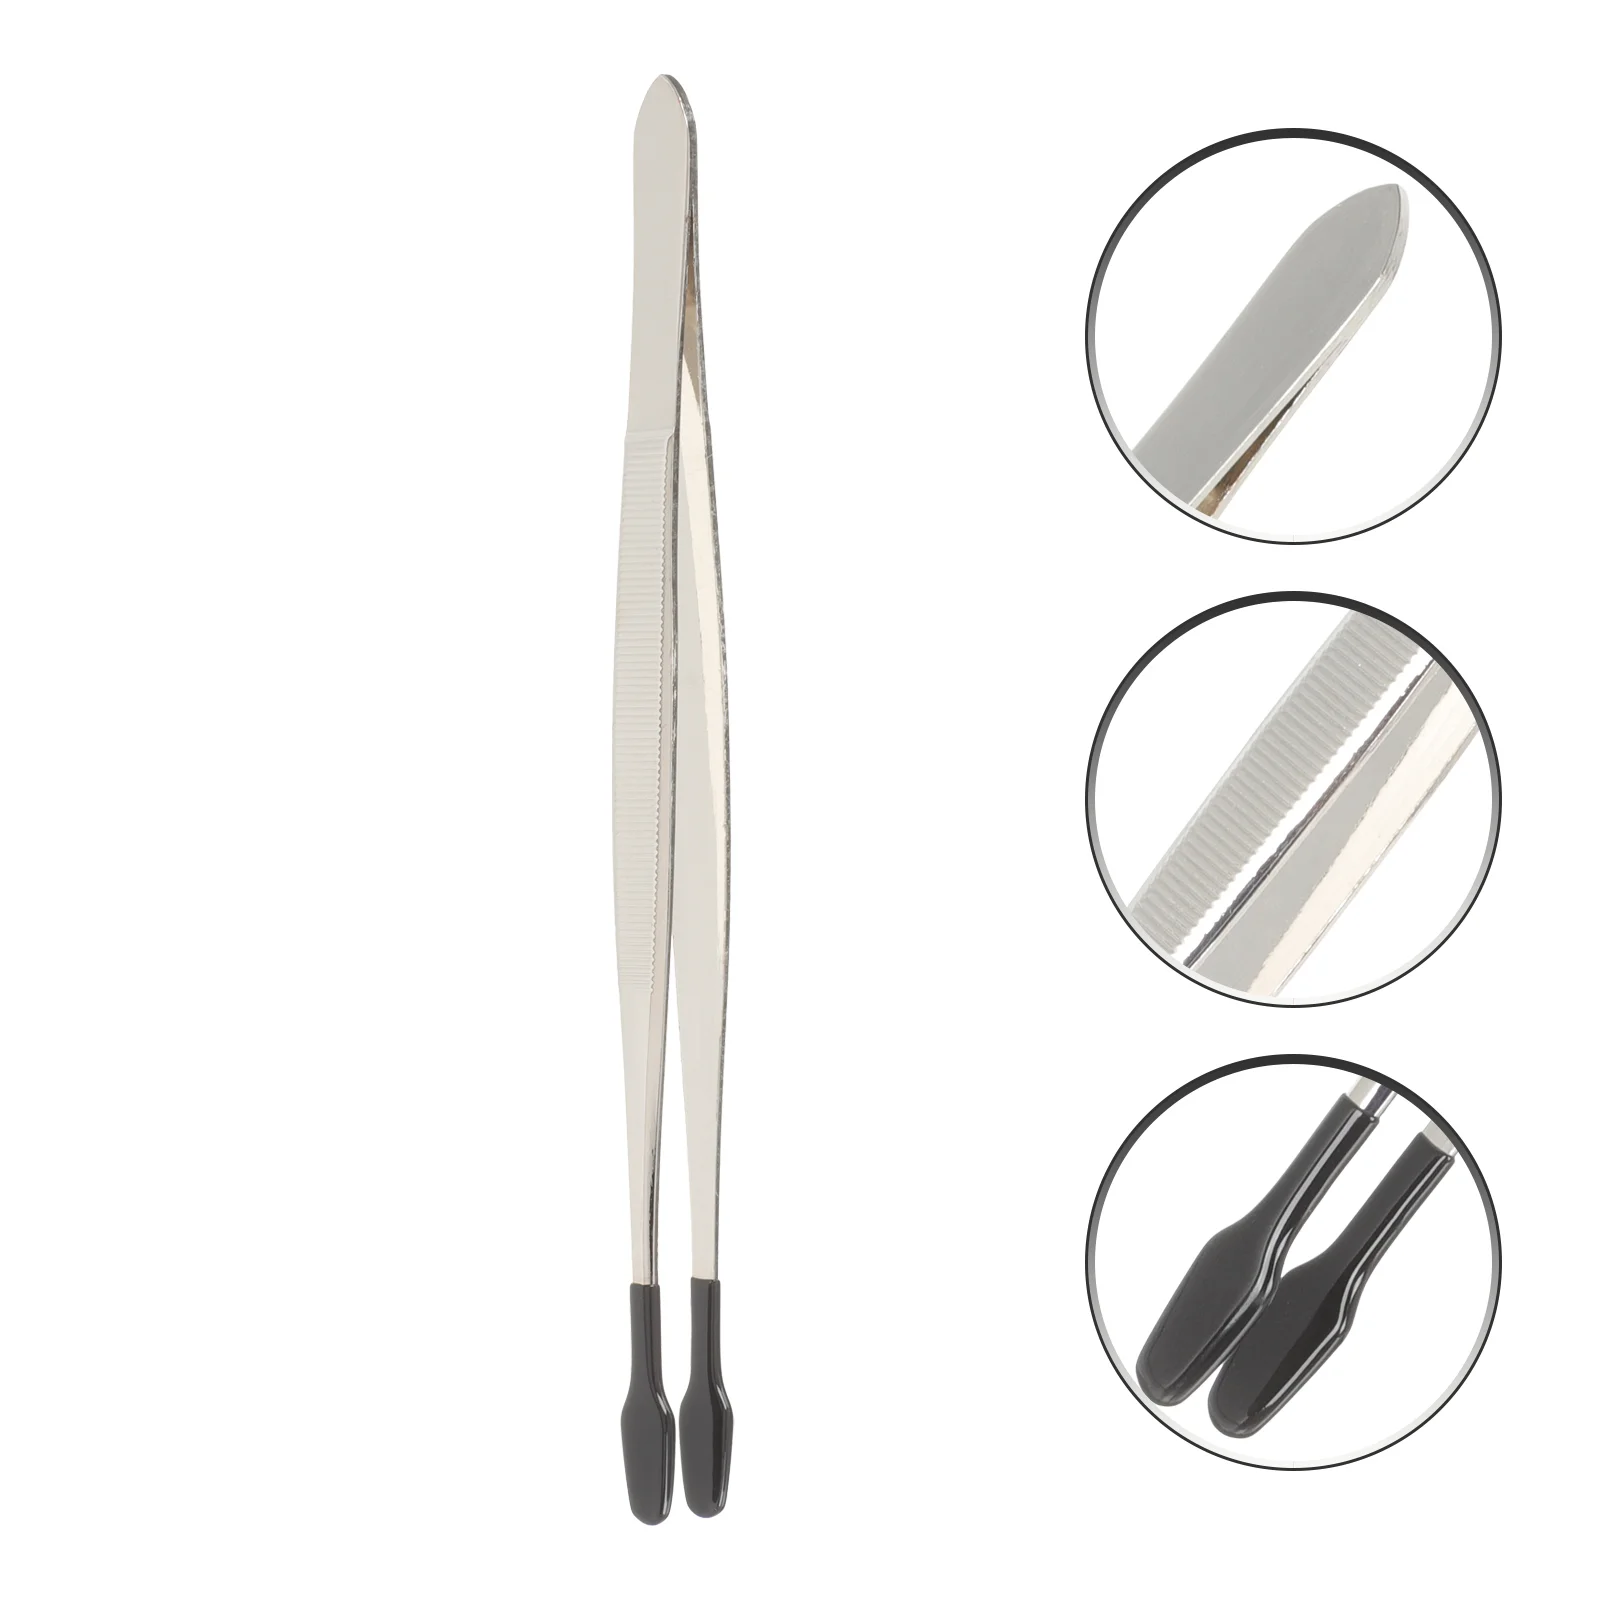 

Tweezers Crafts Rubber Flat Coated Stainless Steel Clip Long Jewelry Coin Tongs Precision Tweezers Craft Laboratory Tool